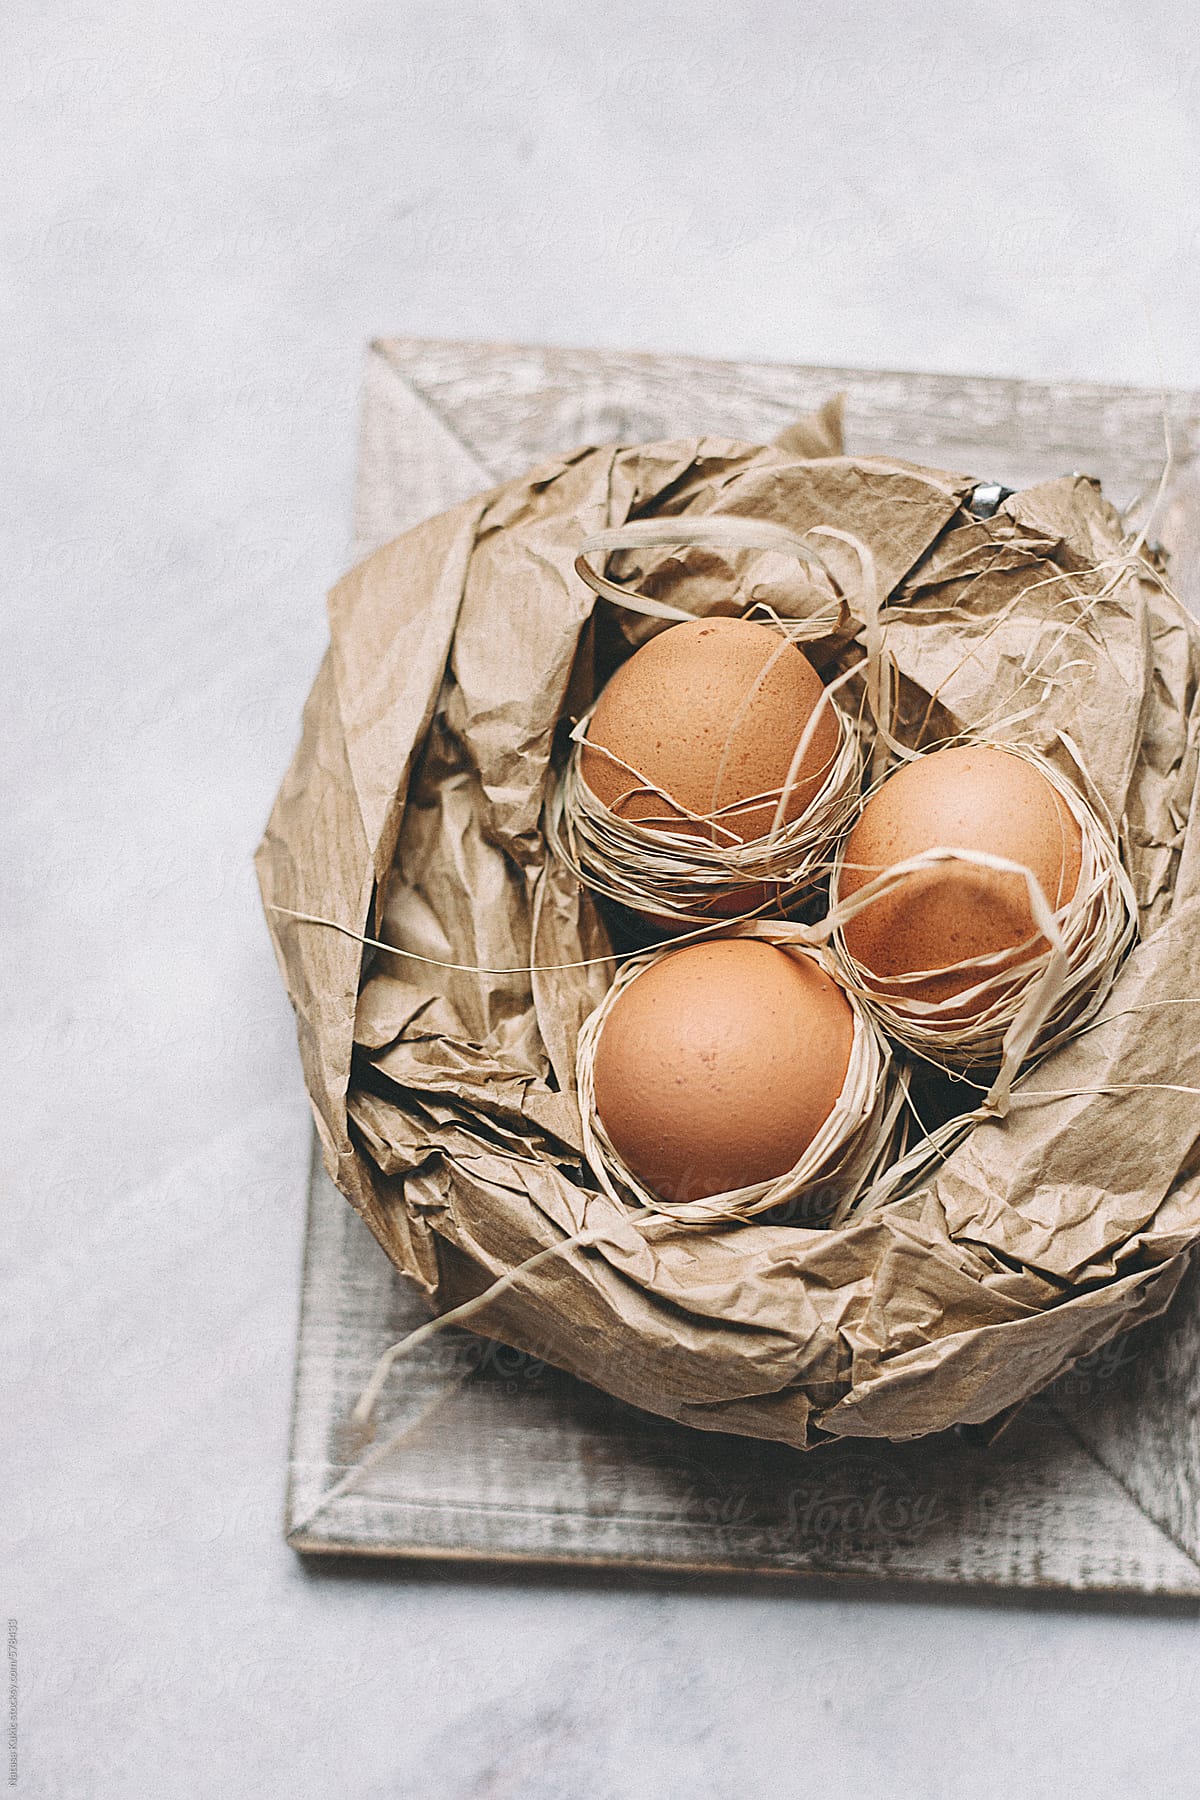 Eggs in a paper nest